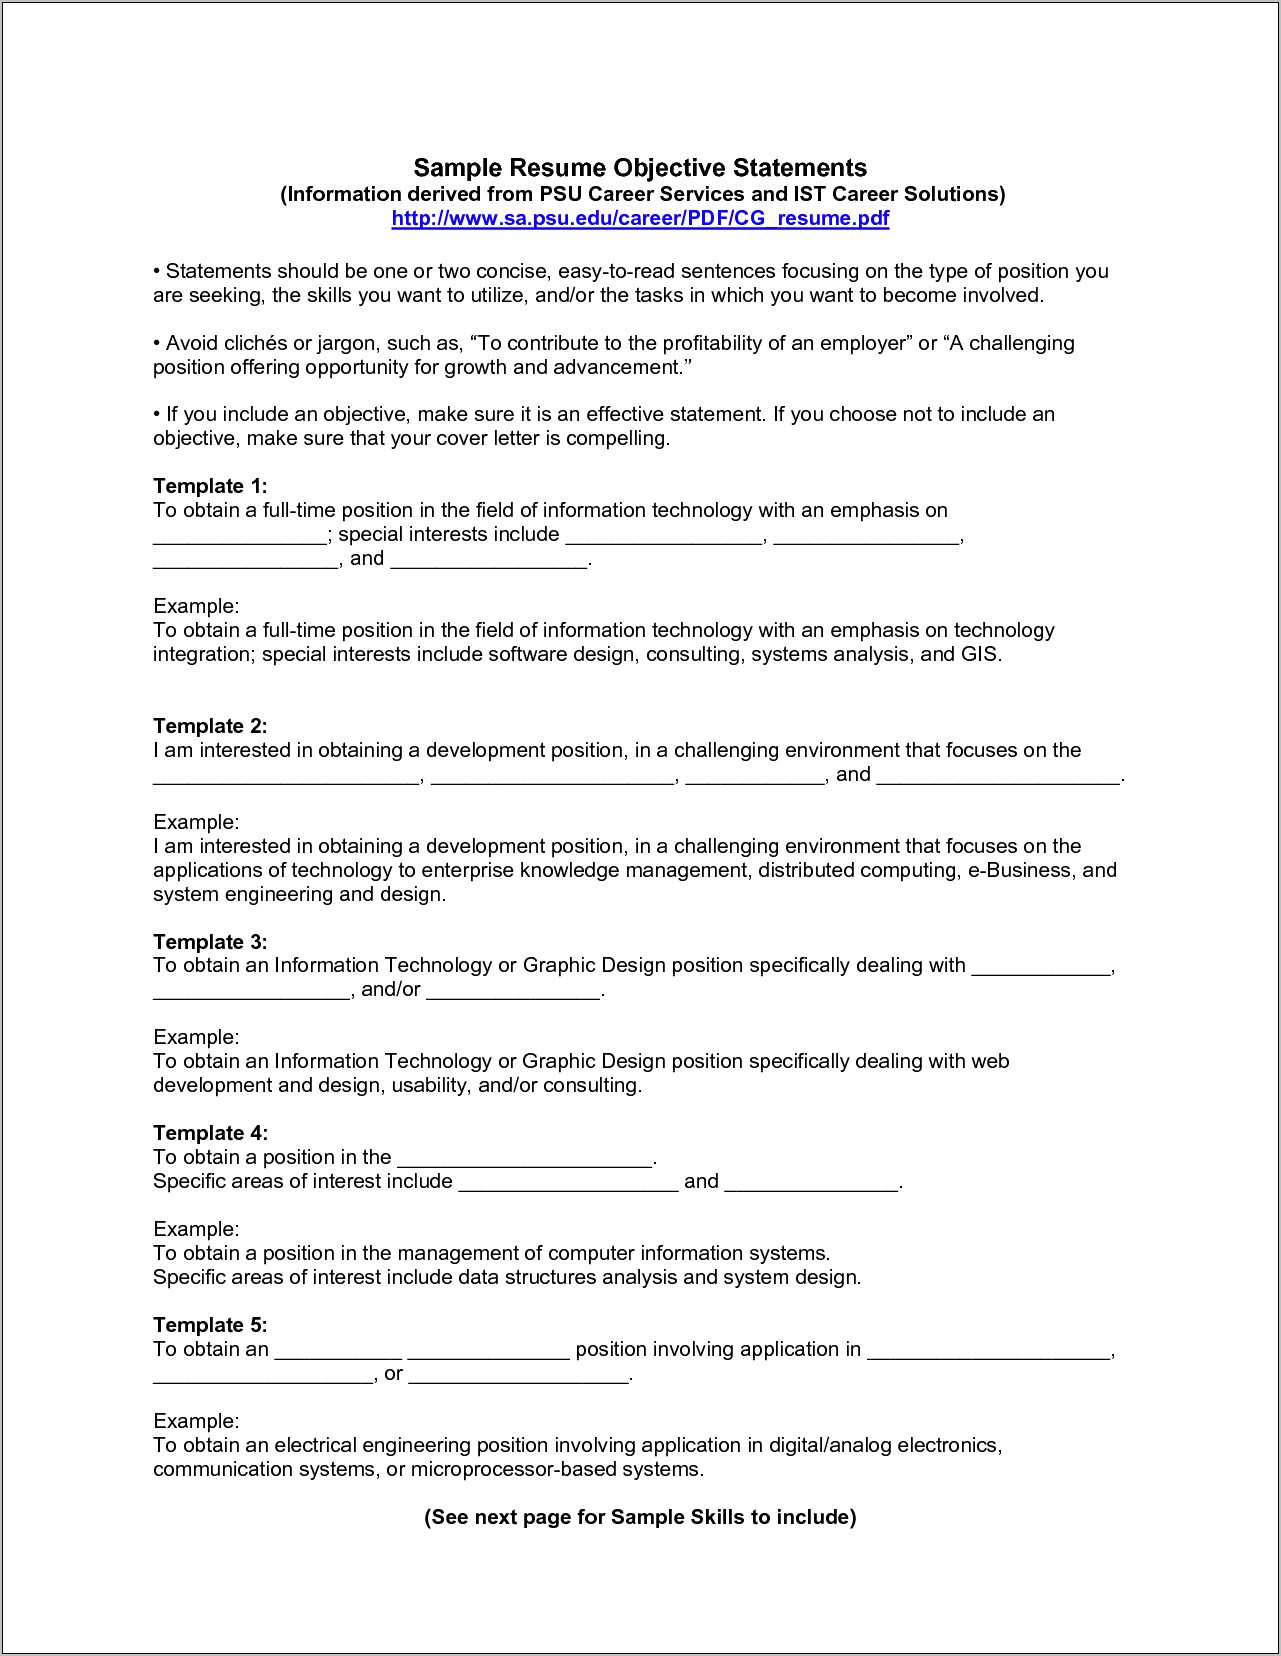 Examples Of Resume Objectives For Human Services